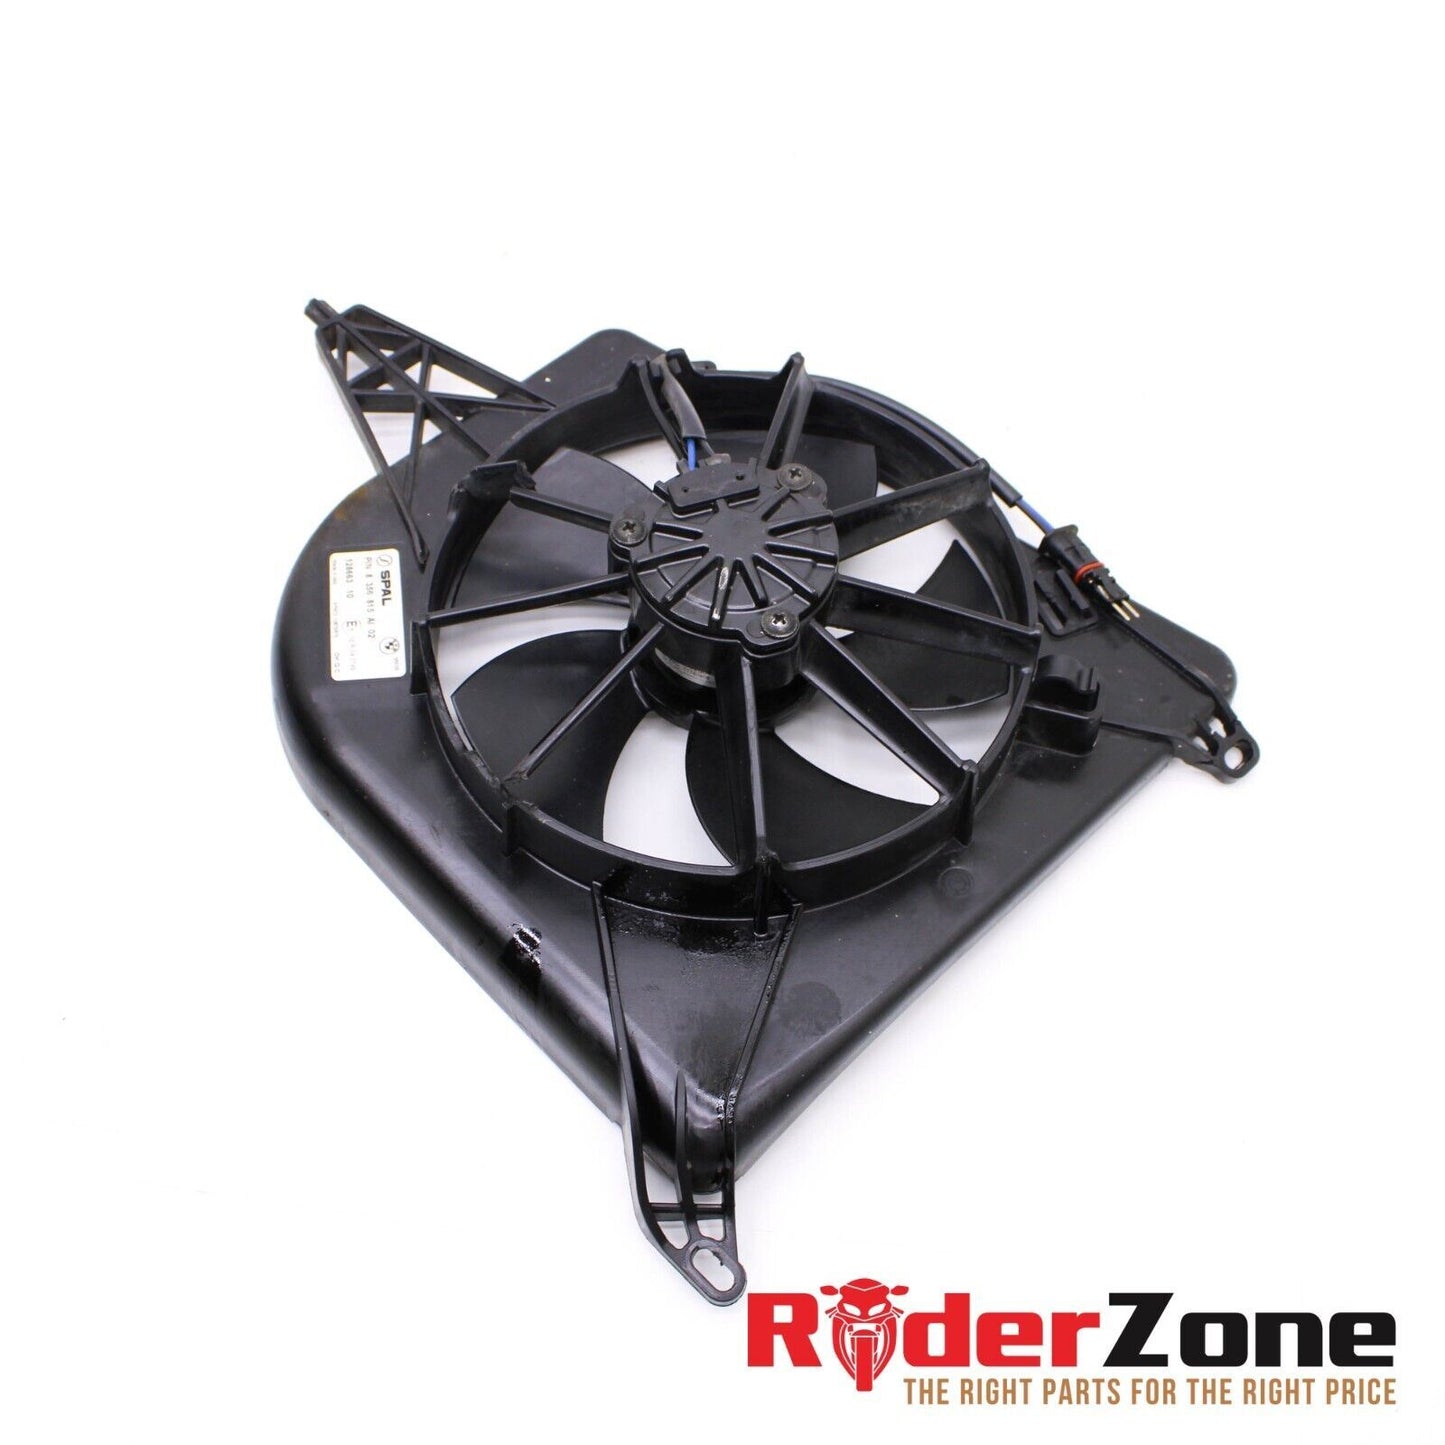 2020 - 2022 BMW S1000RR RADIATOR FAN ENGINE COOLING SYSTEM STOCK GOOD STOCK